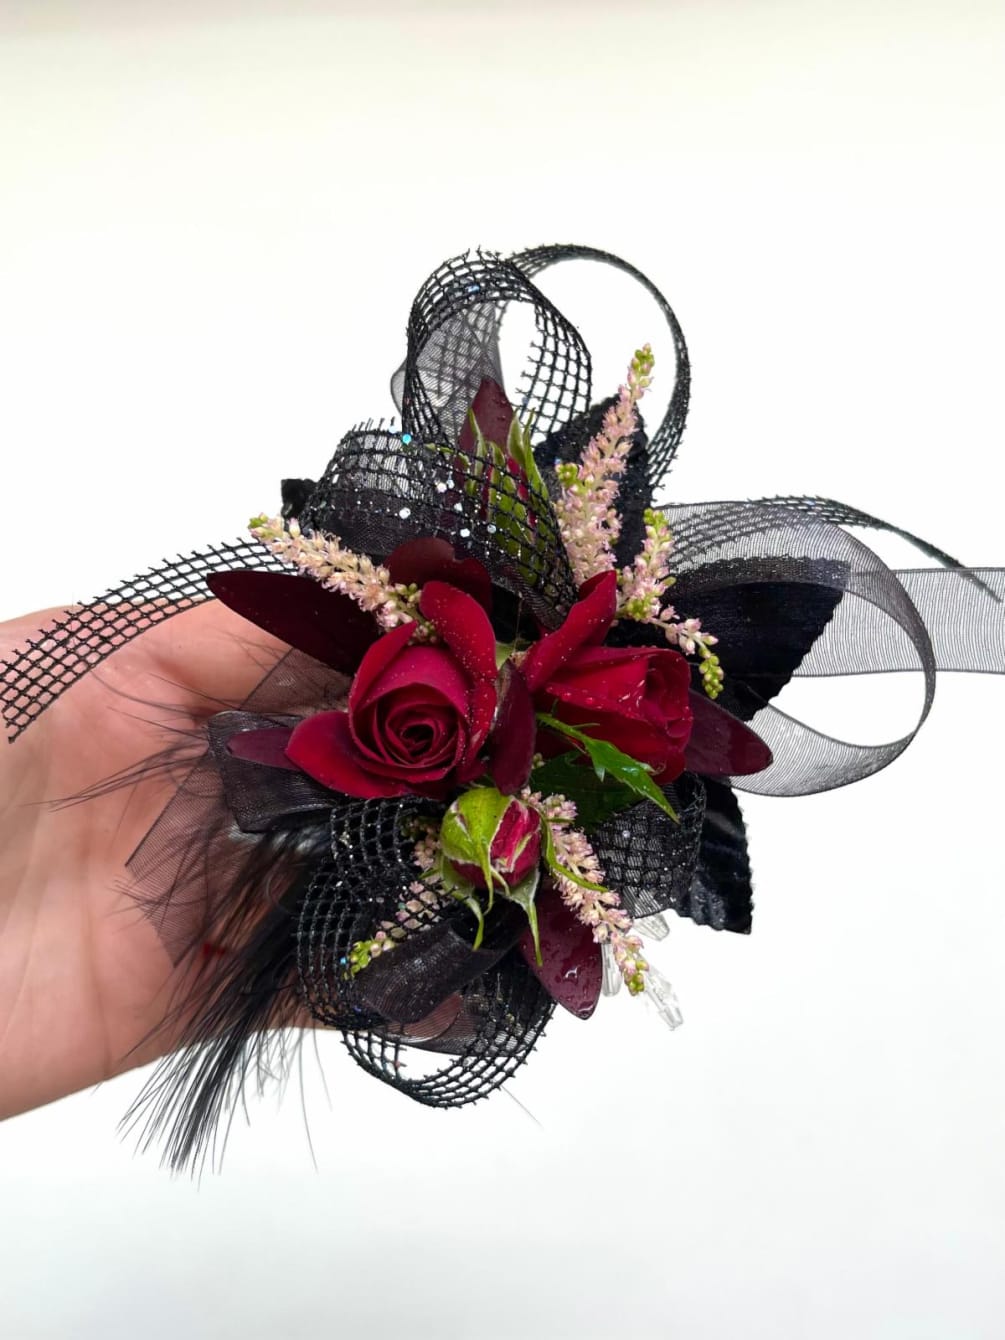 Our premium red and black wrist corsage used dark spray roses and